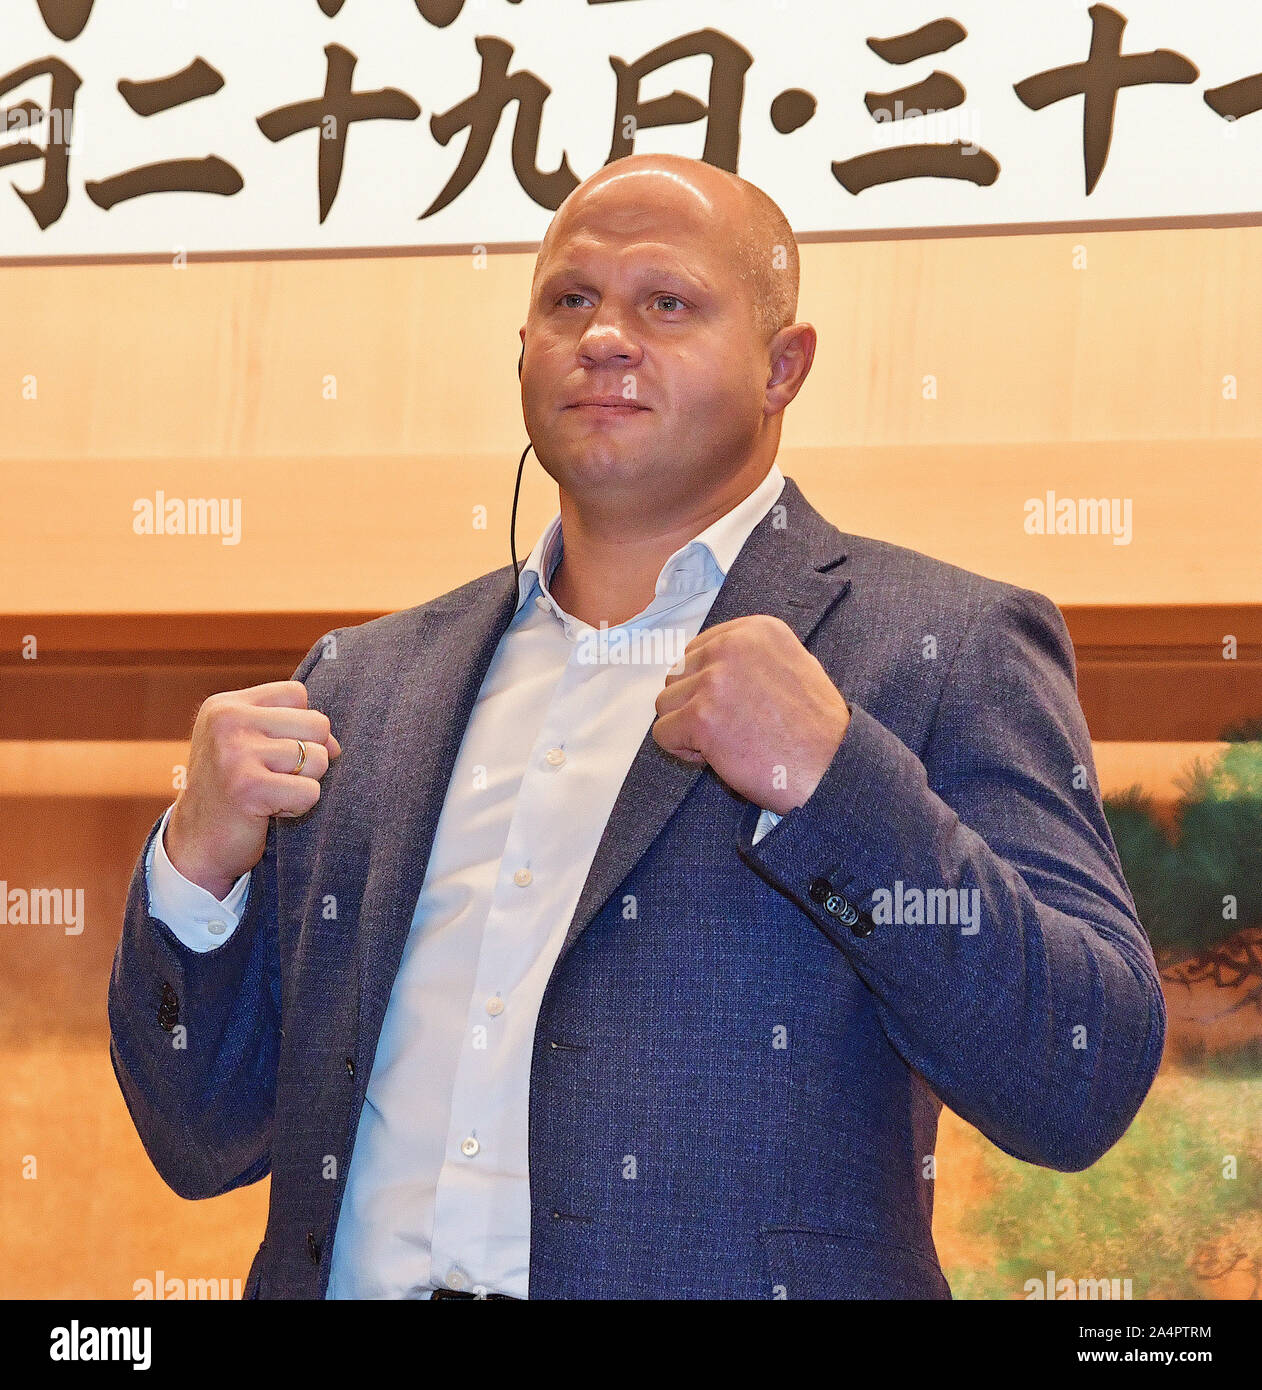 Mixed martial arts fighter Fedor Emelianenko attends the Press Conference for Bellator and RIZIN match at the Meguro Gajoen Hotel in Tokyo, Japan on October 9, 2019. Stock Photo